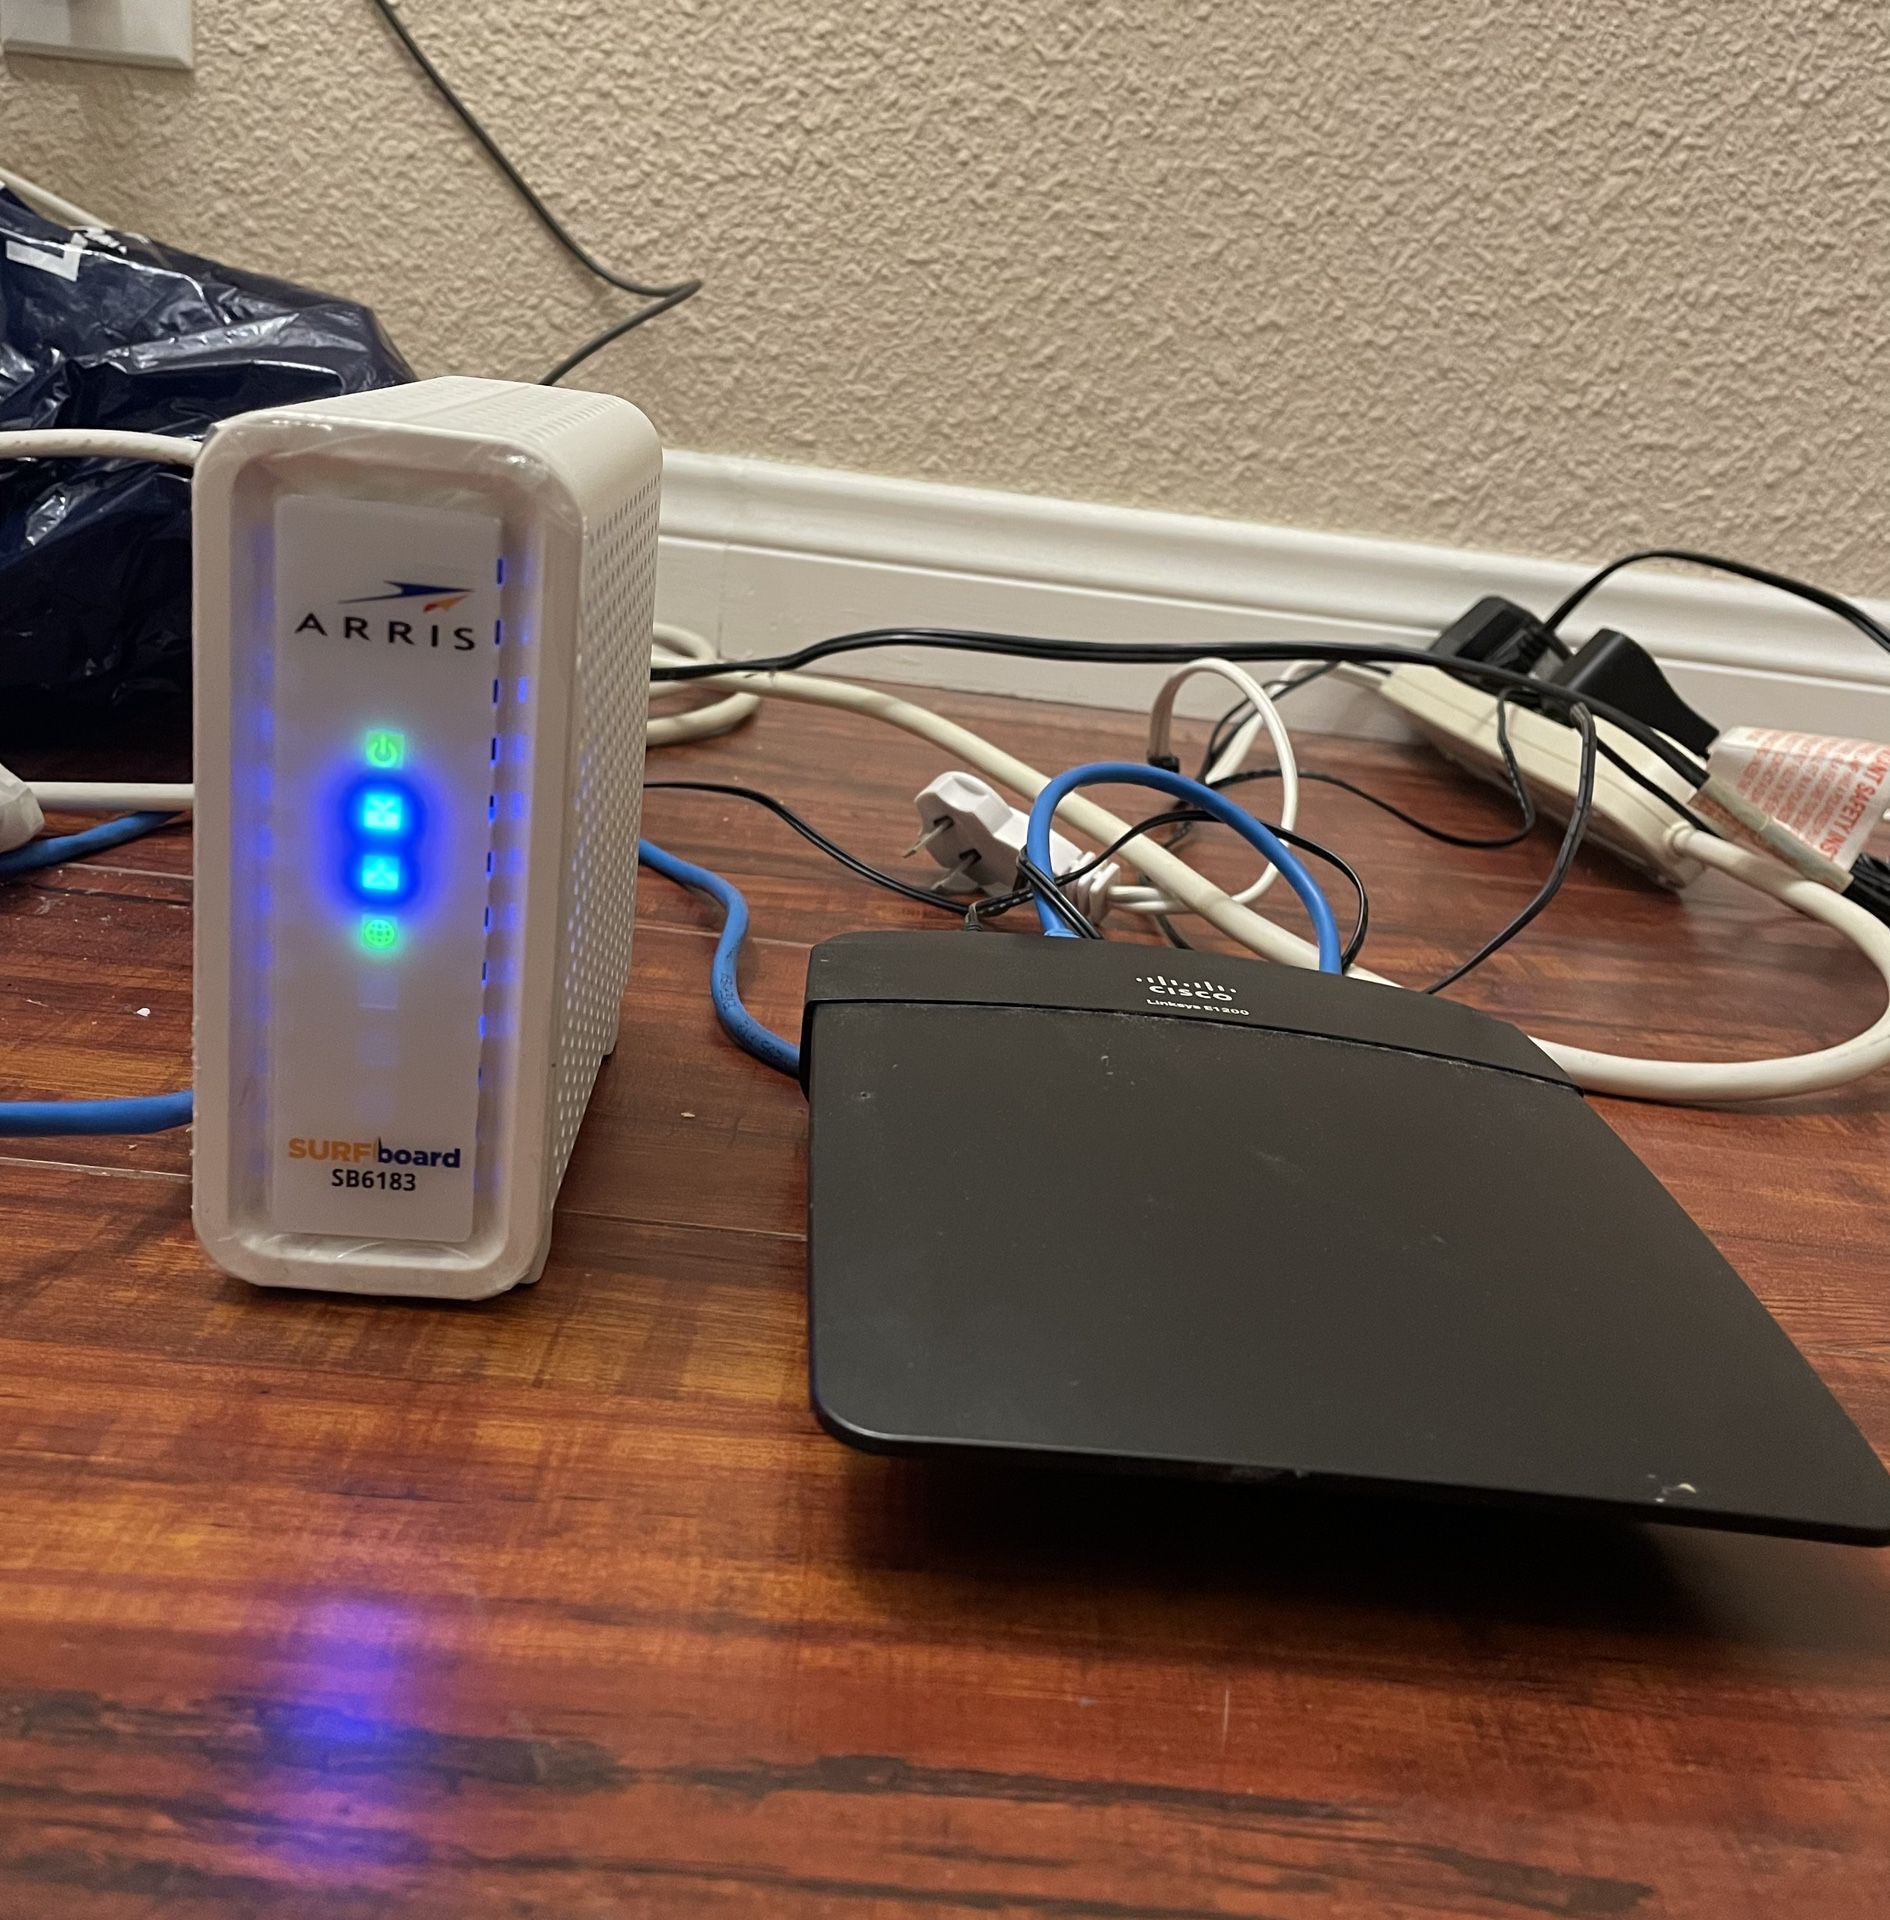 Internet Modem and WiFi Router